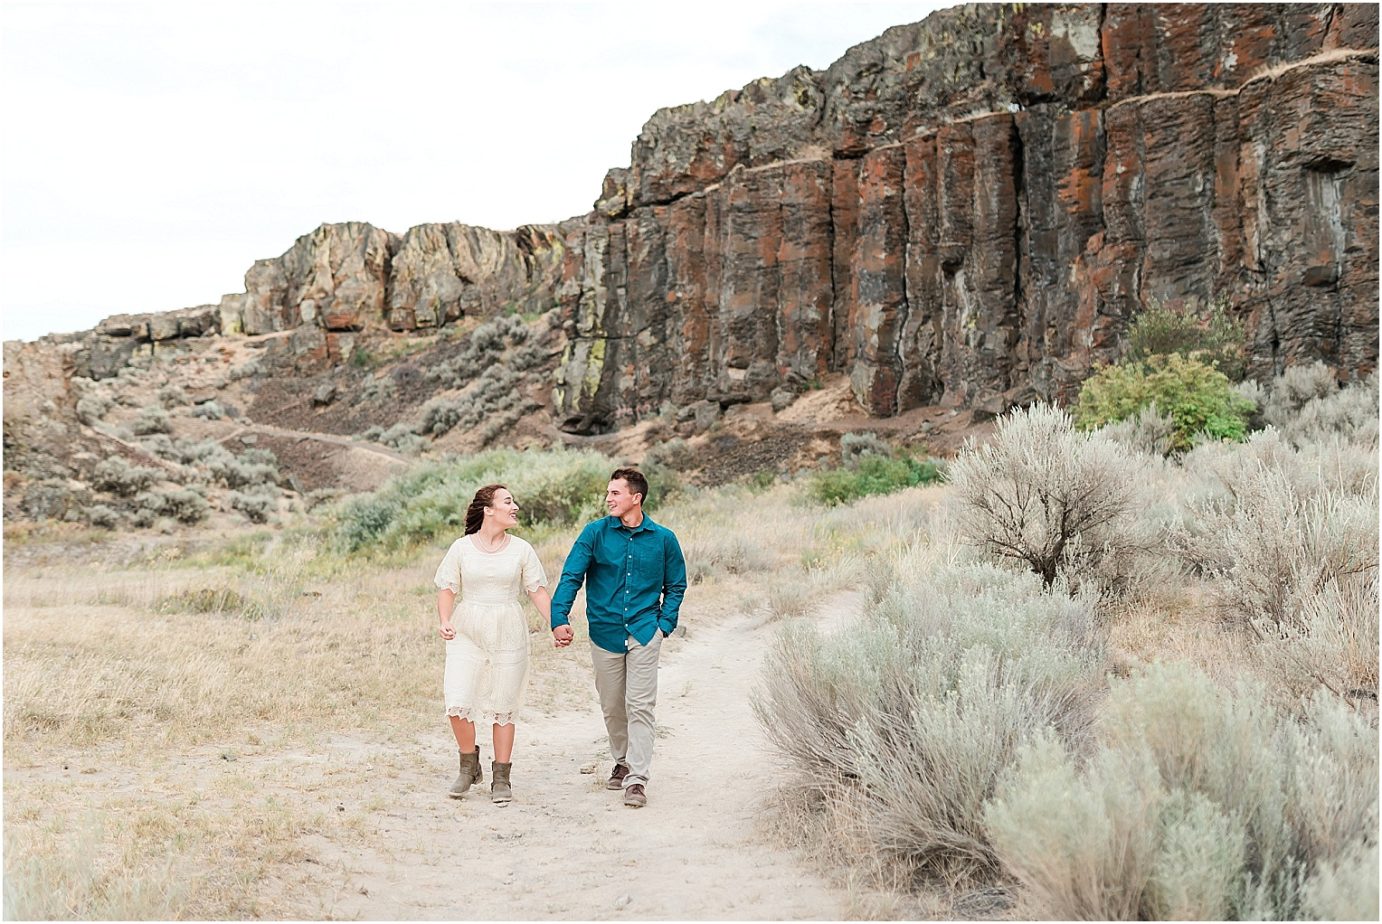 Desert Engagement Session Central WA Regan and Lindsey walking on a path